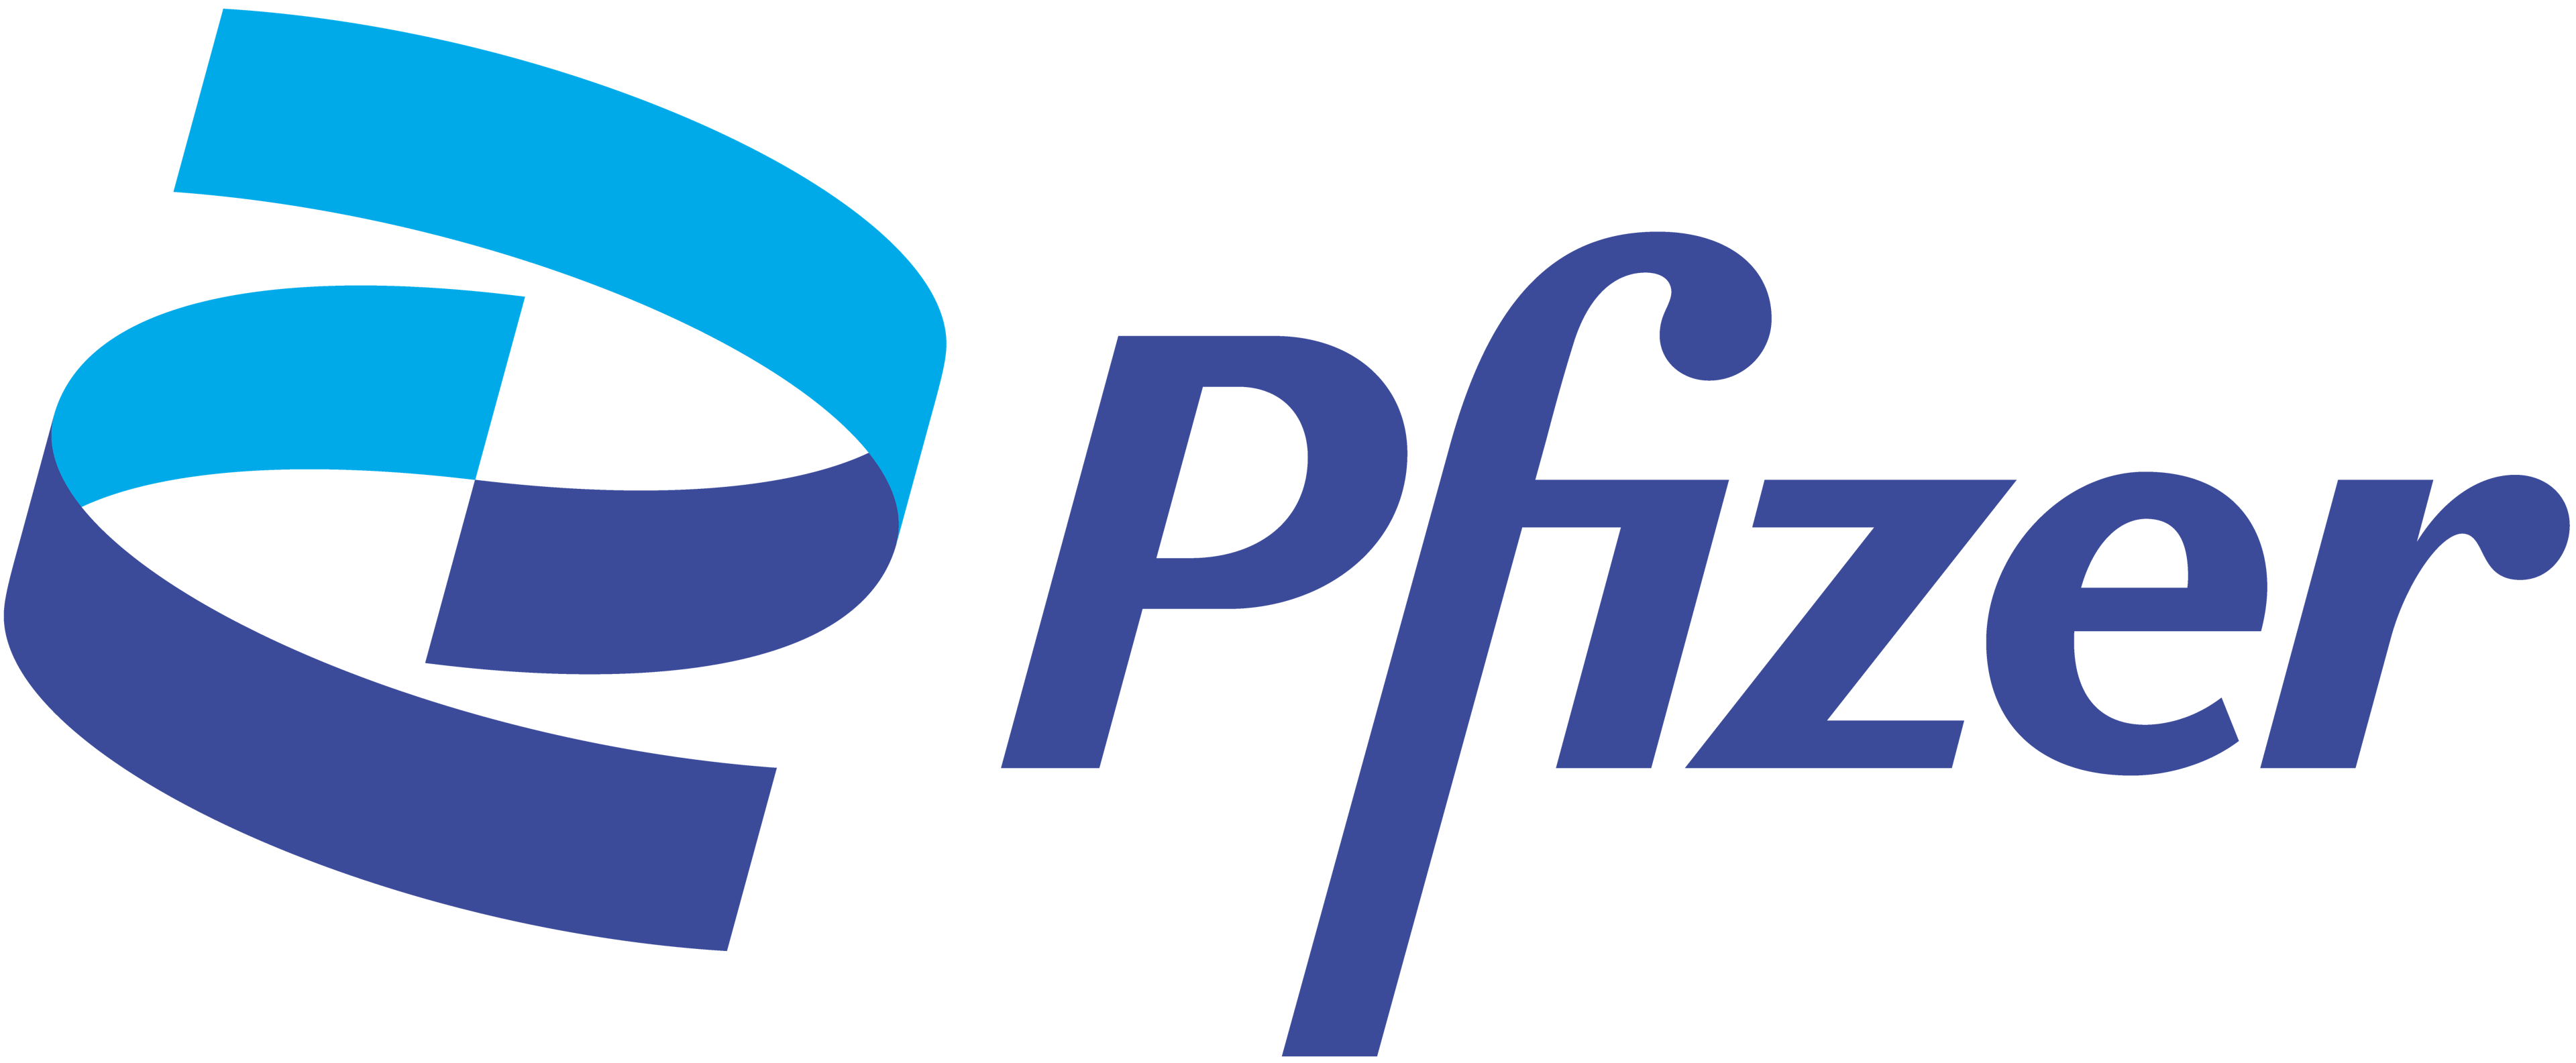 Pfizer-BioNTech Developing a COVID-19 Delta Variant Vaccine